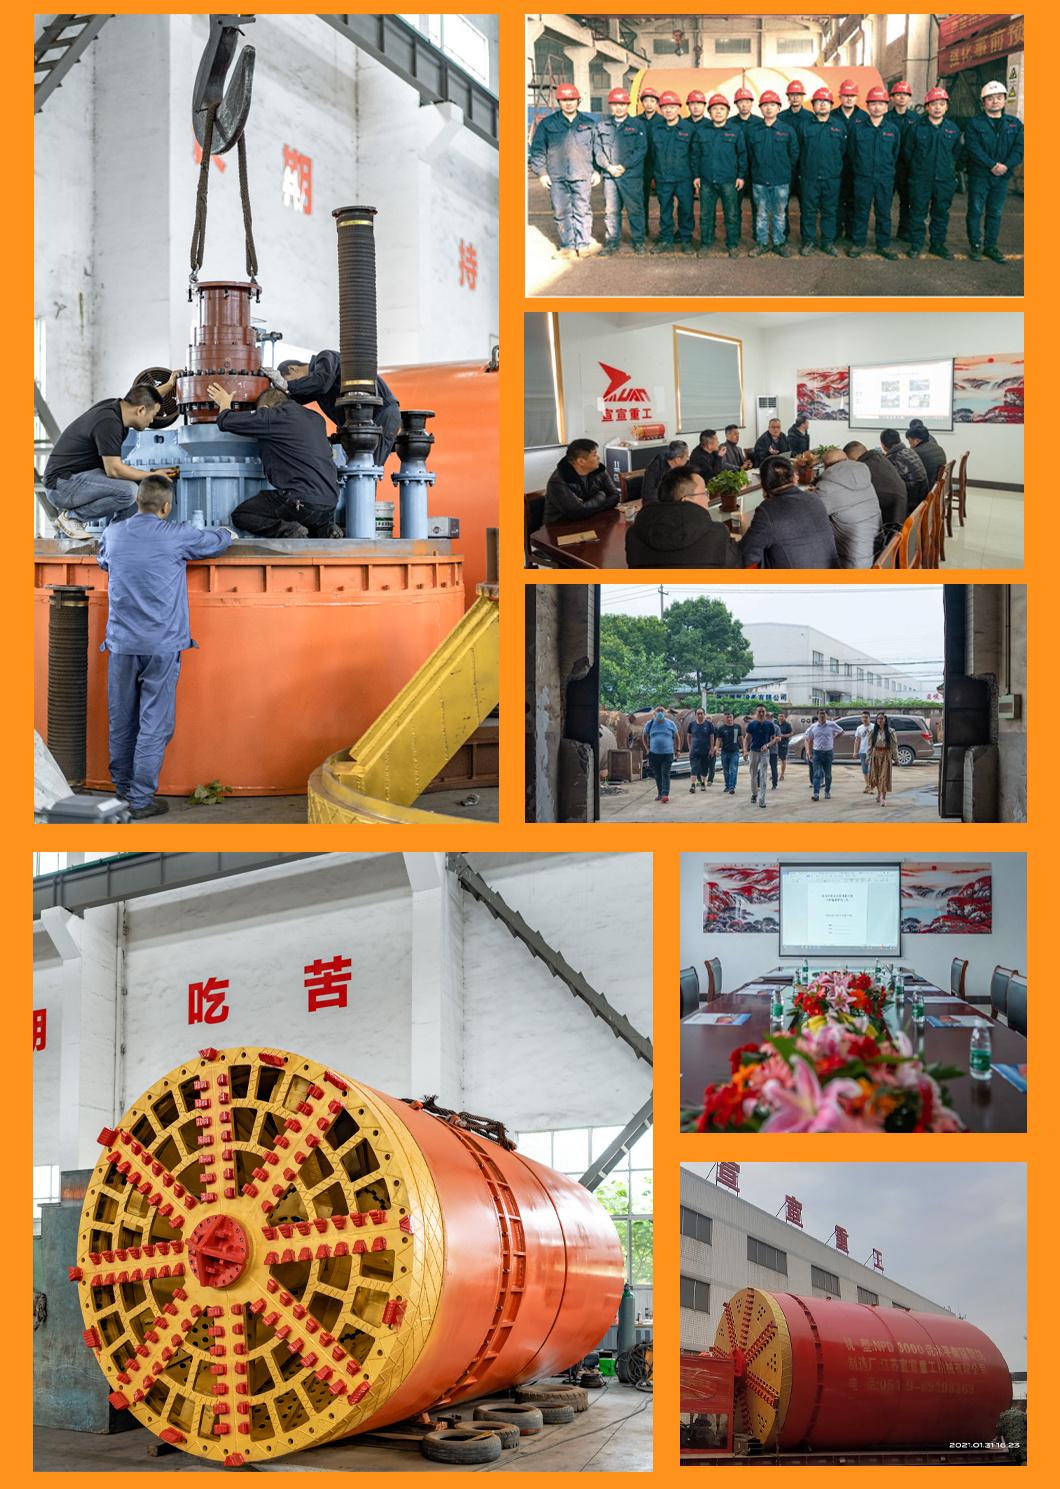 Trenchless Project Ysd3000 Rock Pipe Jacking Machine for Rcc with Good Price